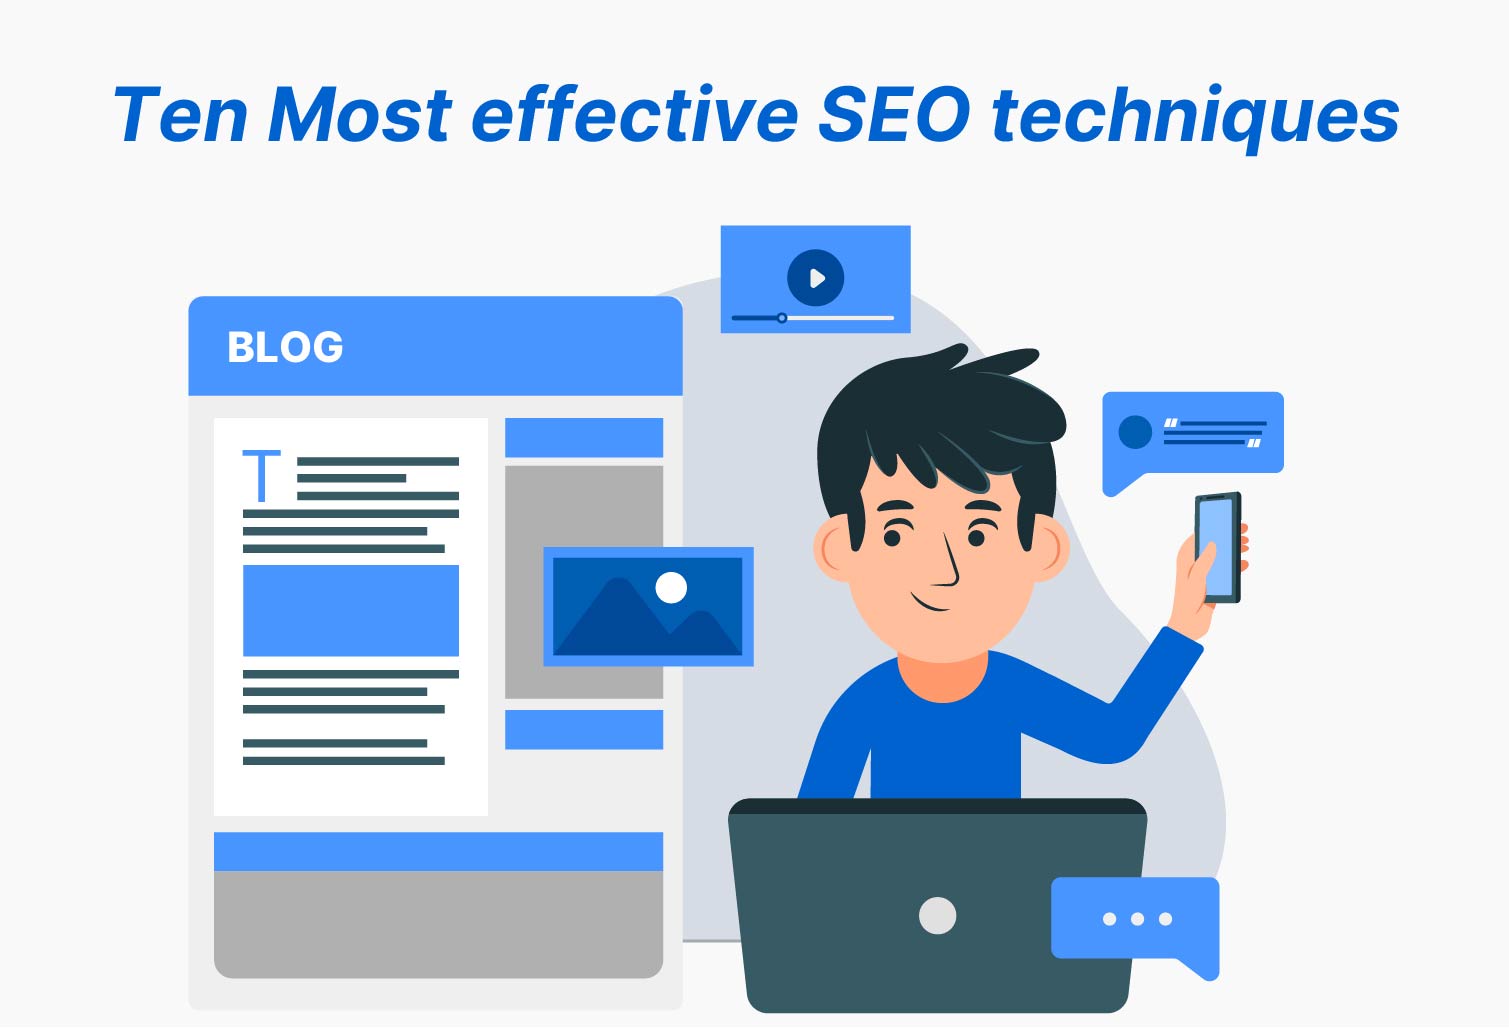 SEO, search engine optimization, optimizing various websites, web pages,  top keywords ranking in SERP, SEO services in India, Ten Most effective SEO techniques, MWS, Magic Web Services in India, 